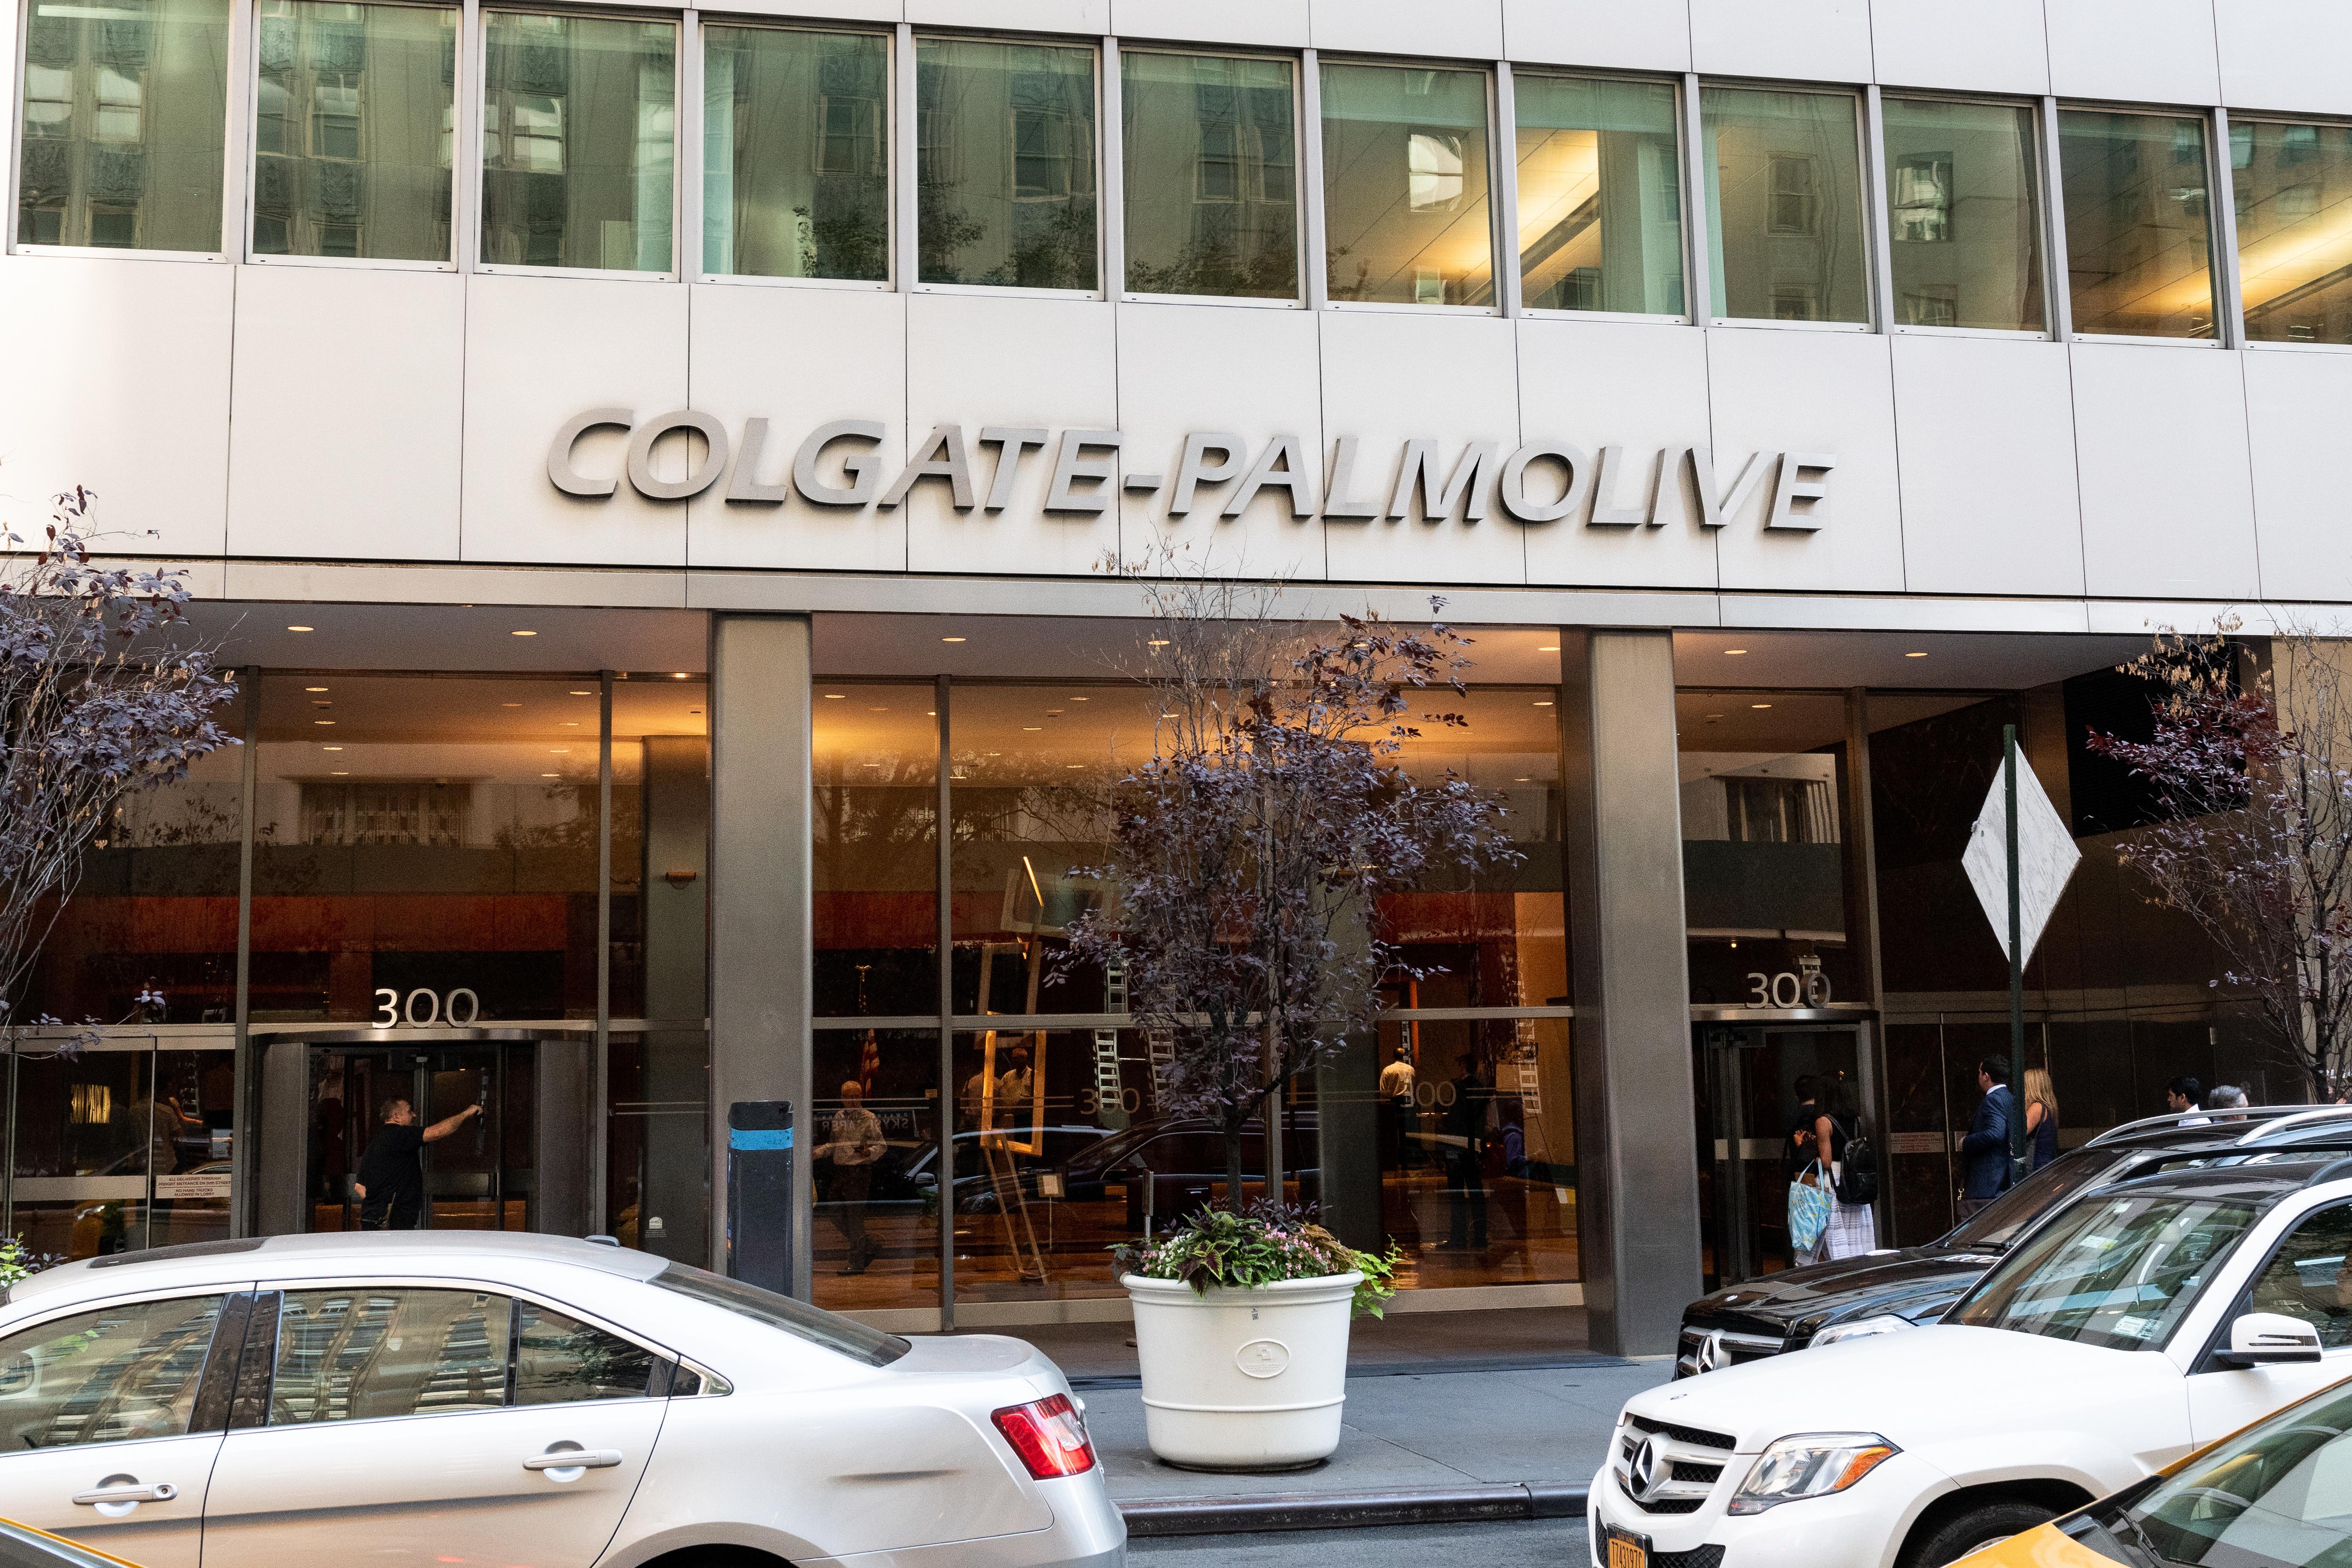 The Colgate-Palmolive headquarters in New York.